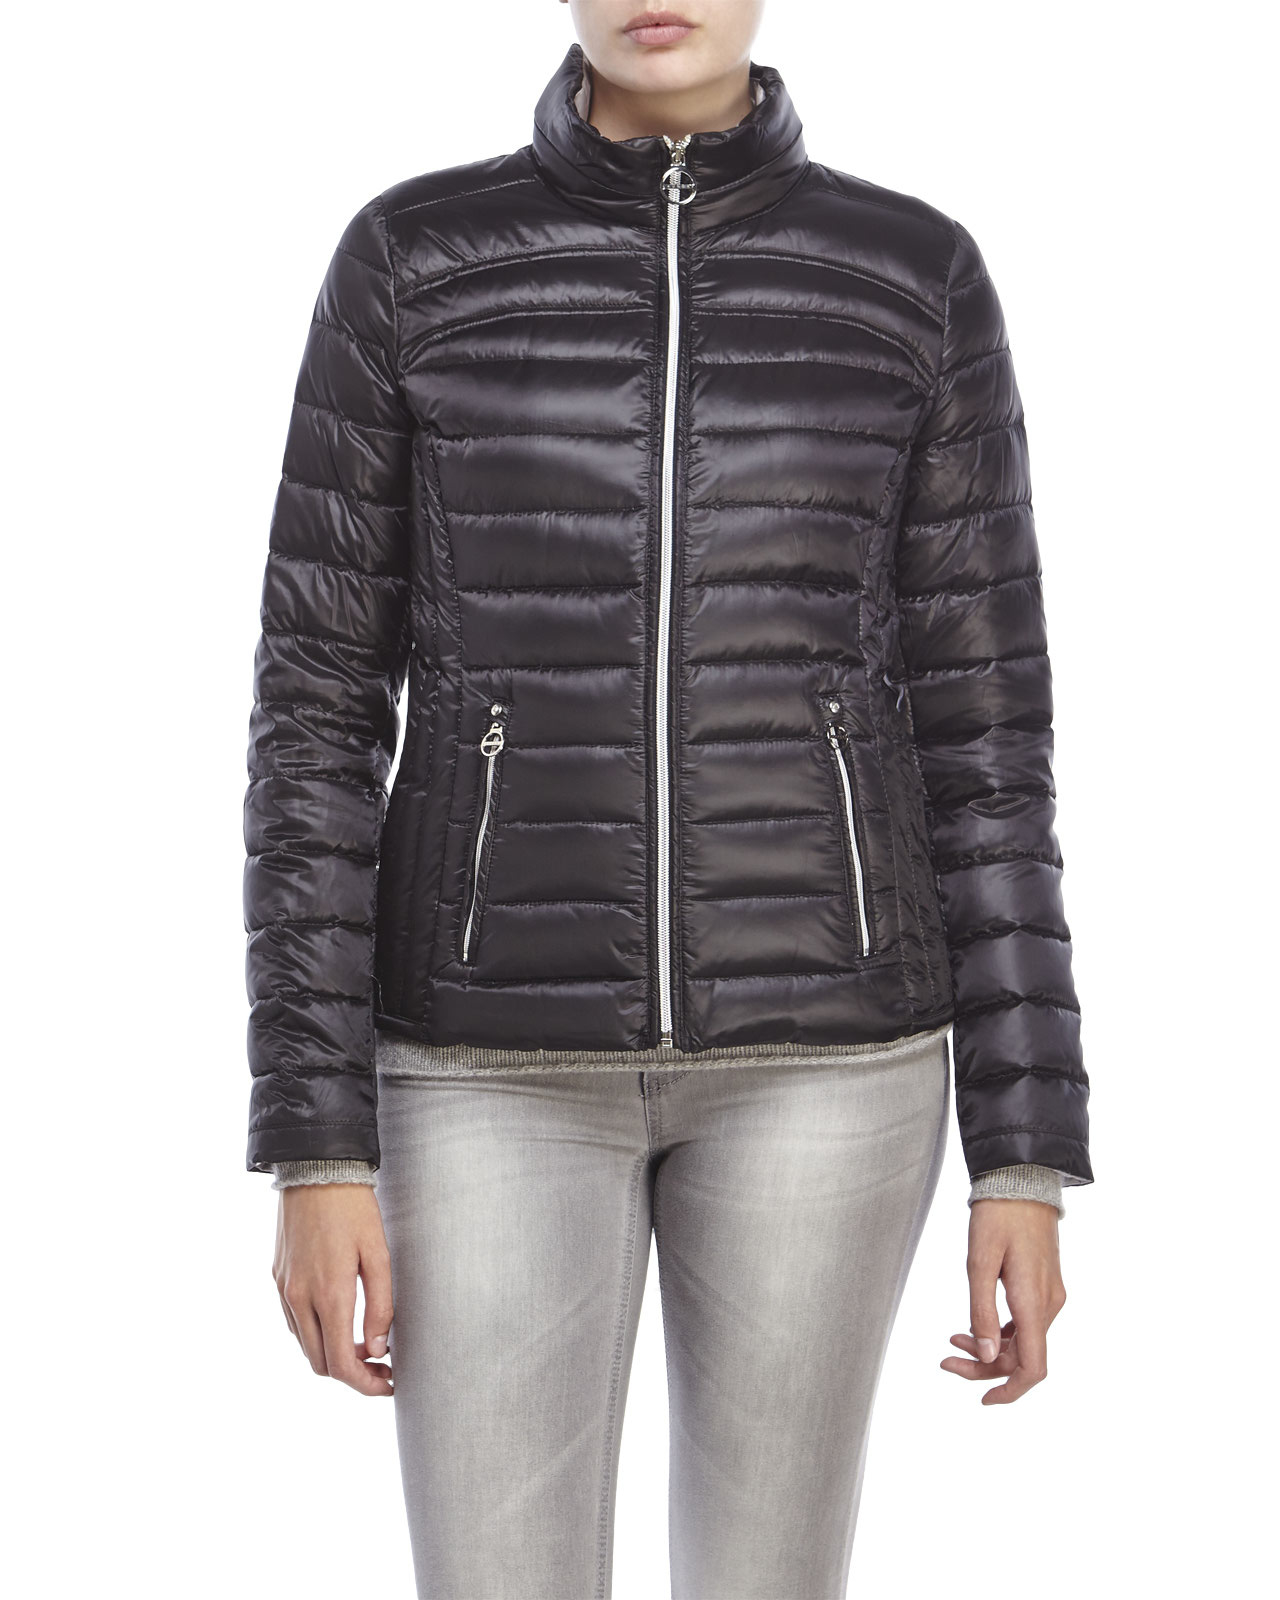 Lyst - Laundry by Shelli Segal Packable Down Puffer Jacket in Black